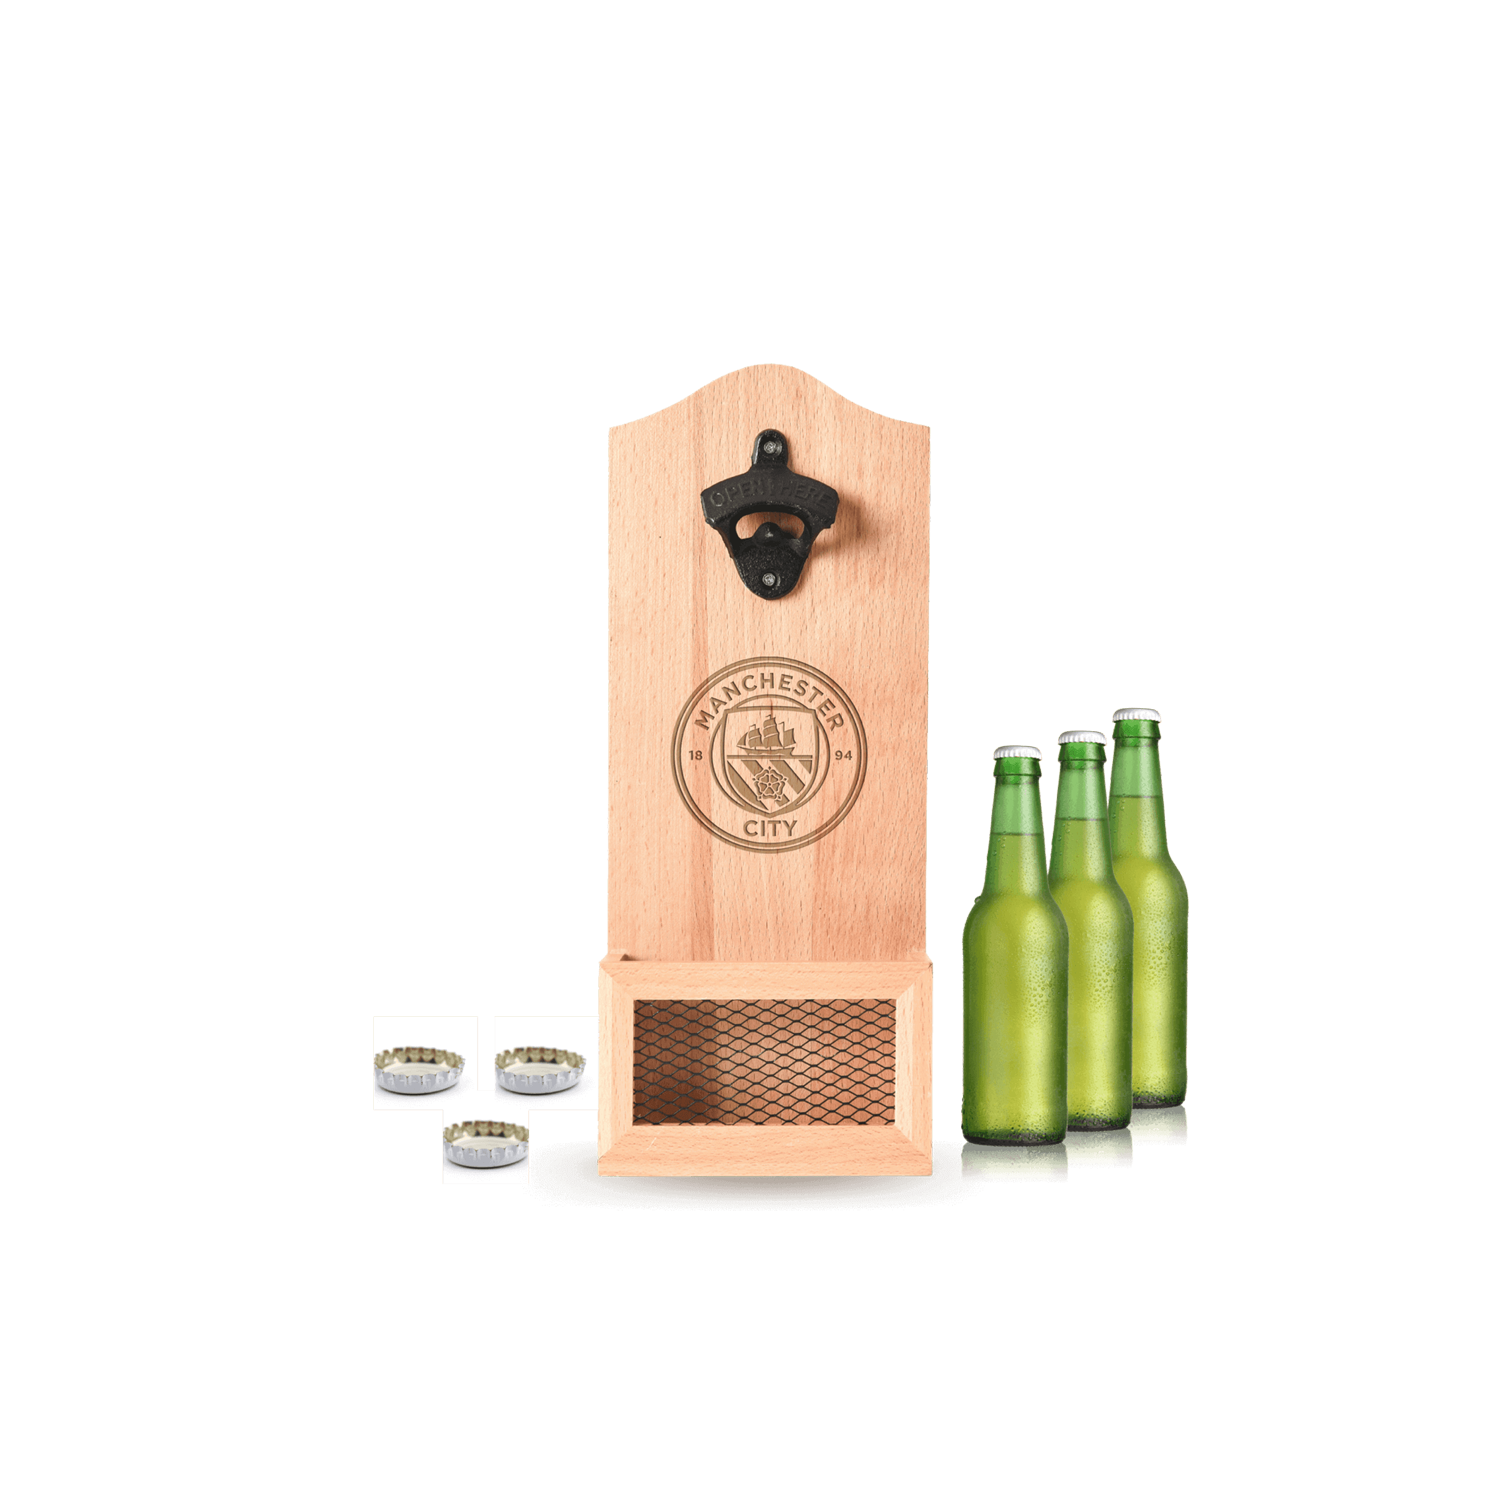 MANCHESTER CITY WALL MOUNTED WOODEN BOTTLE OPENER_MANCHESTER CITY_STUBBY CLUB